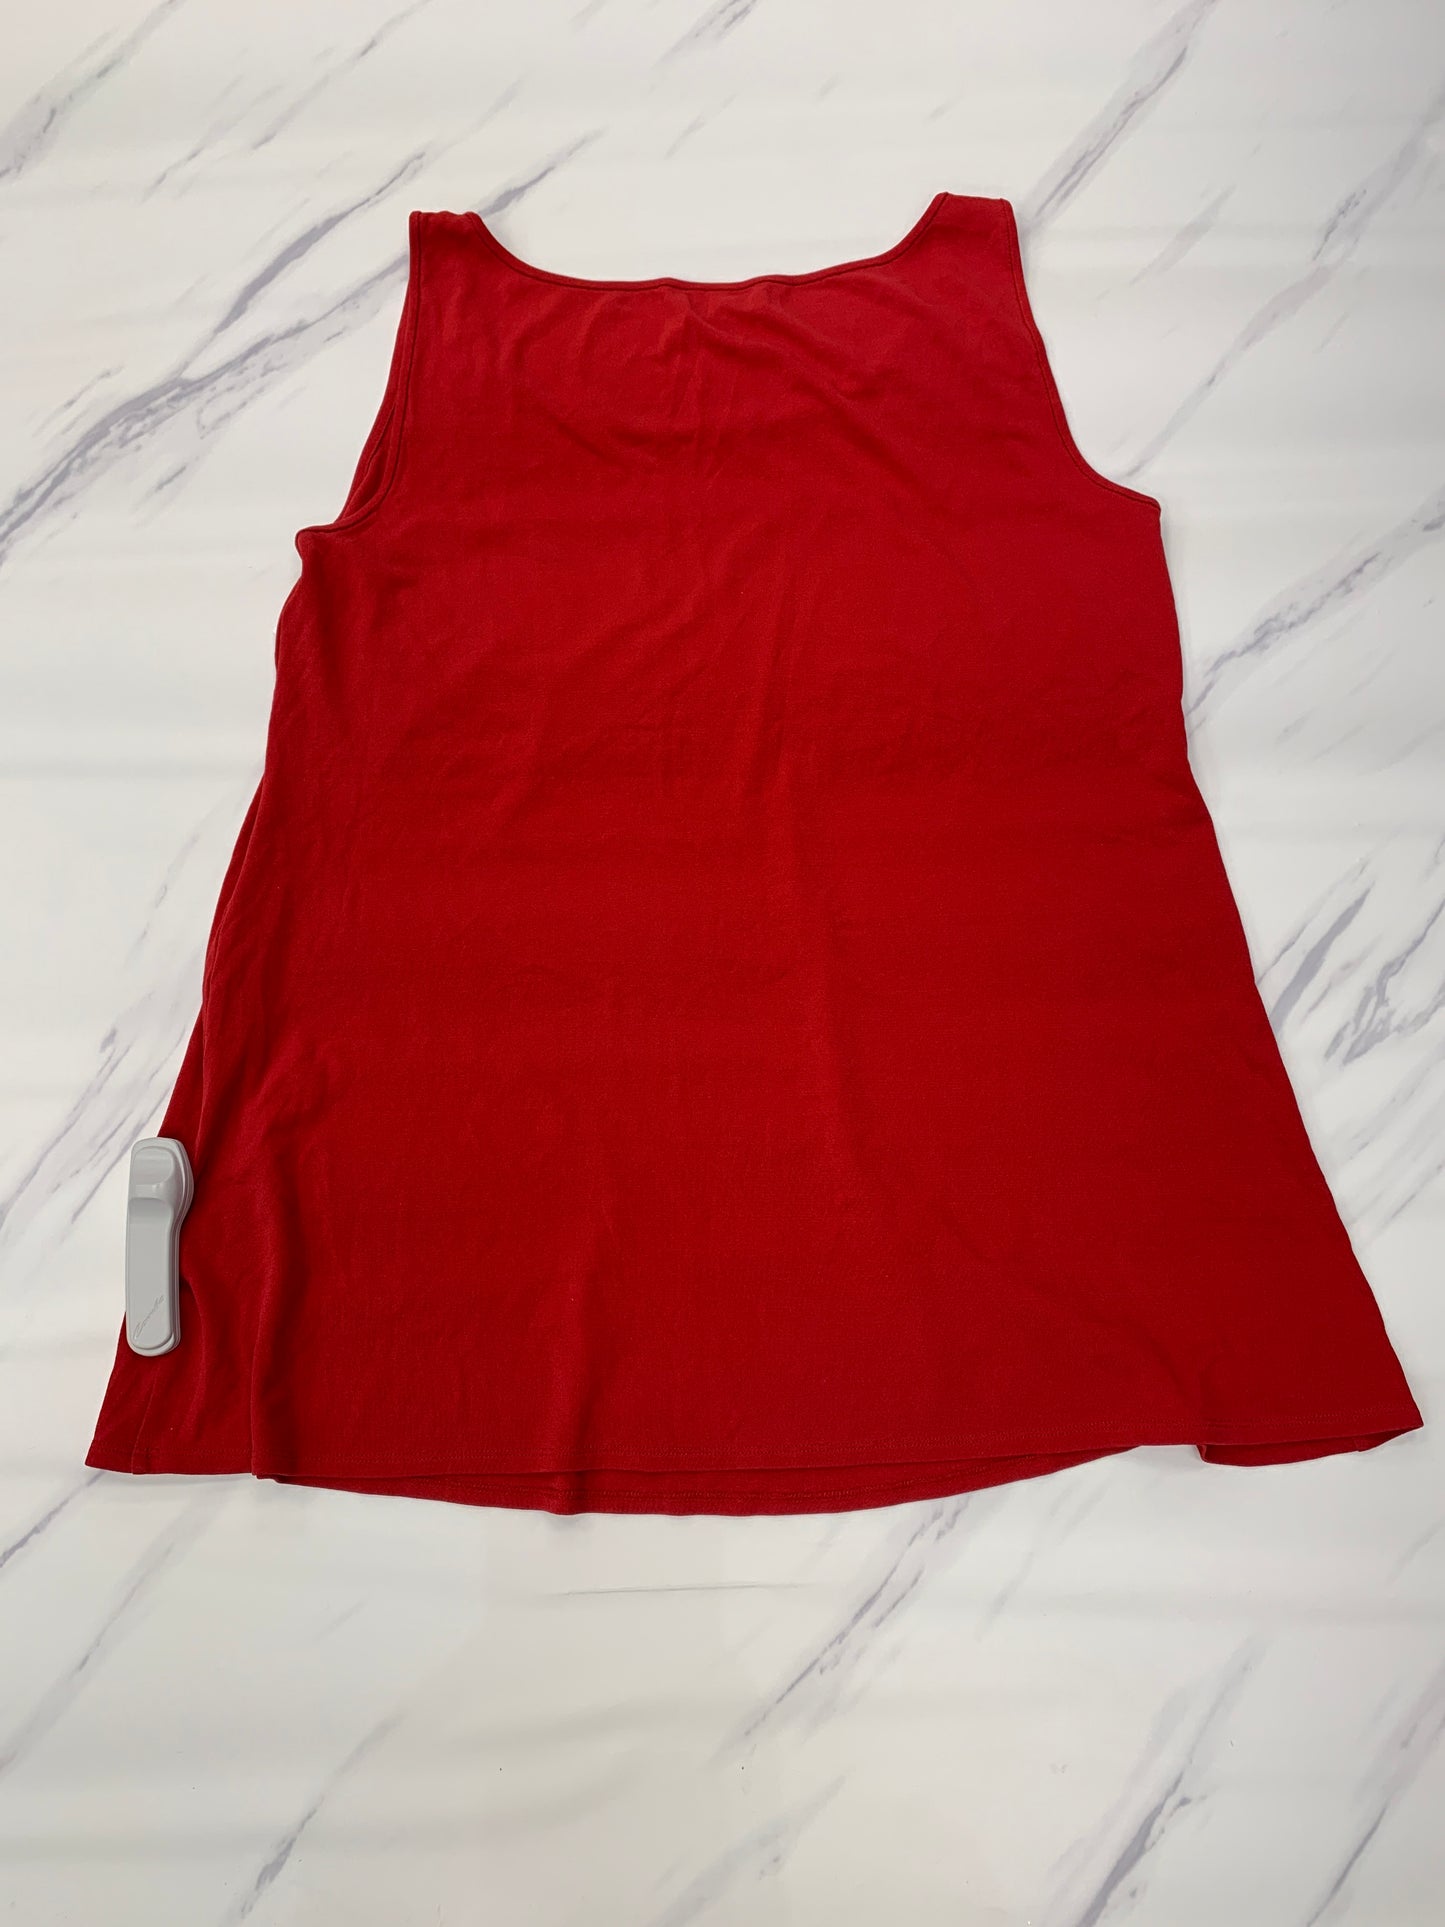 Top Sleeveless Designer By Eileen Fisher  Size: M